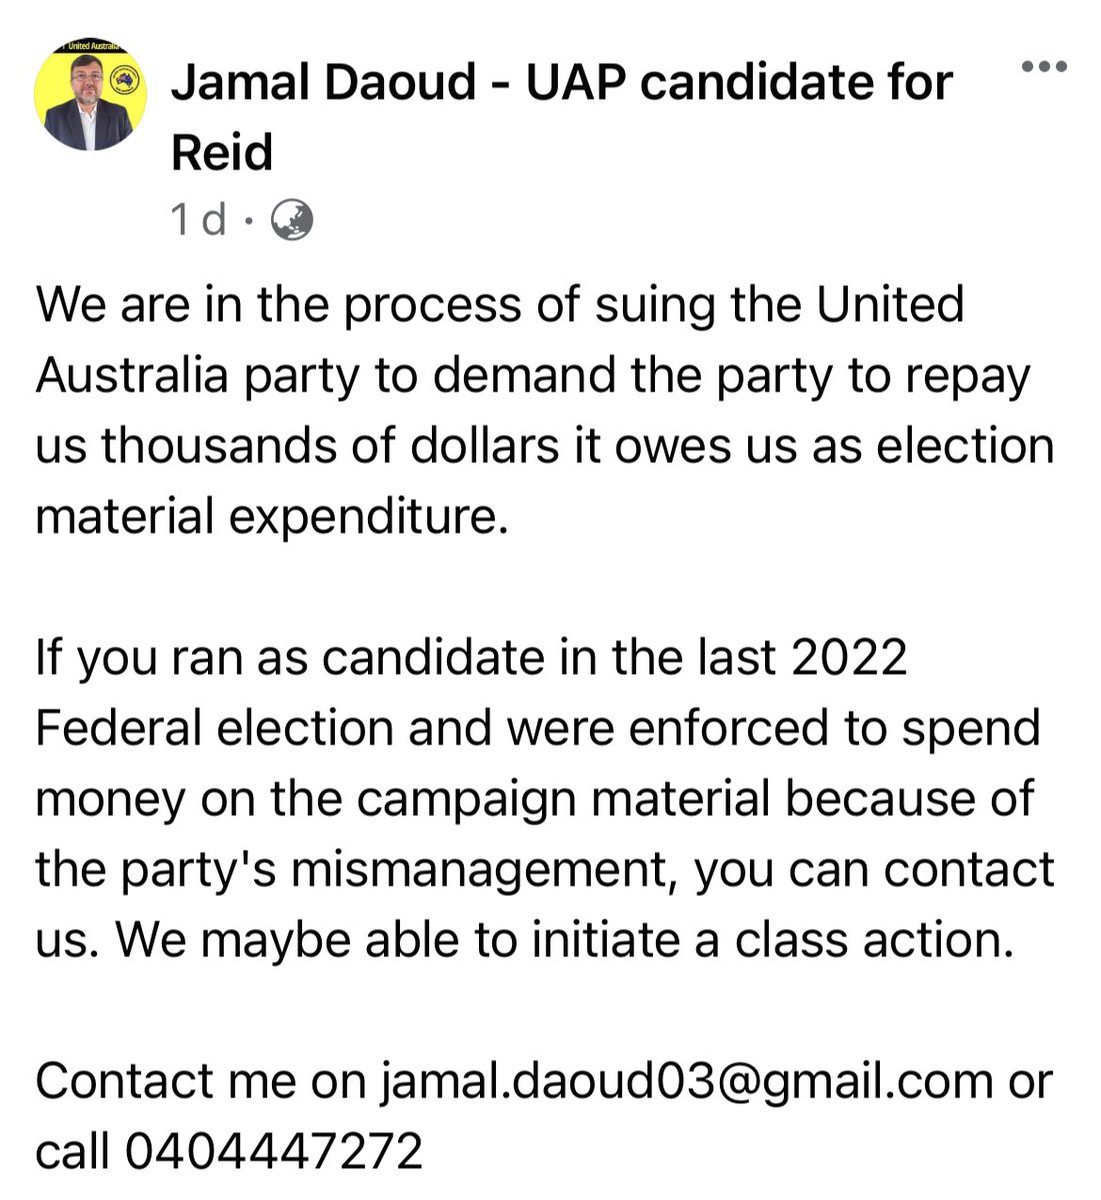 You wouldn’t believe it! After @CliveFPalmer robbed his workers a few years back, he and his @UnitedAusParty mates have appeared to have robbed their candidates. Who would have thought that they were a team of shonks!!! @CKellyUAP #ausvotes22 #auspol